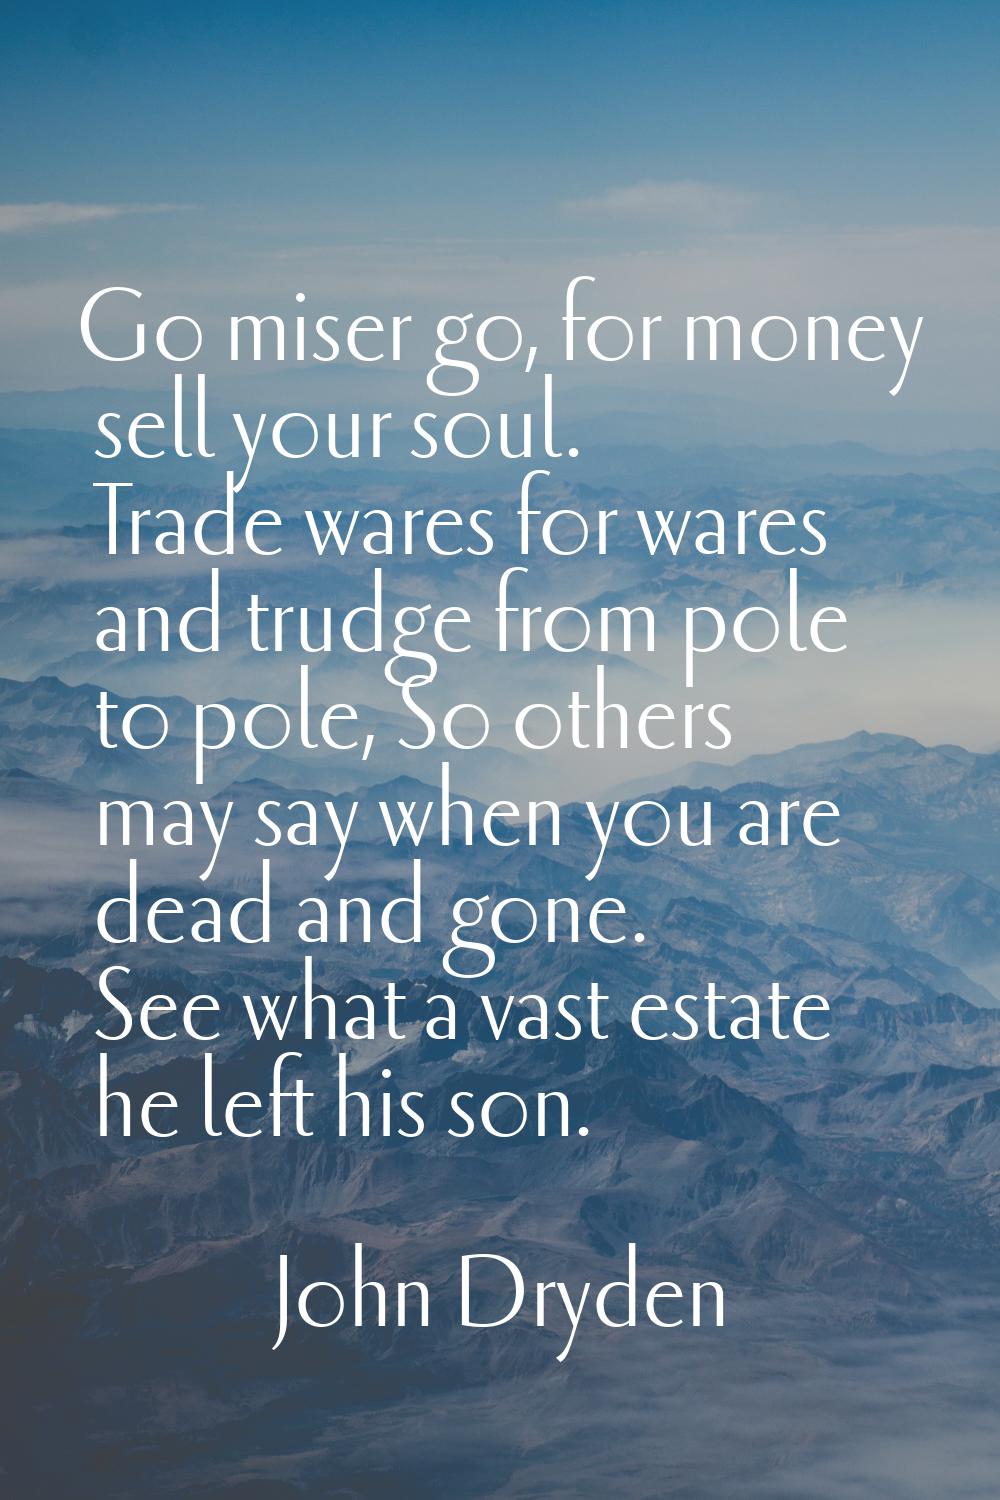 Go miser go, for money sell your soul. Trade wares for wares and trudge from pole to pole, So other